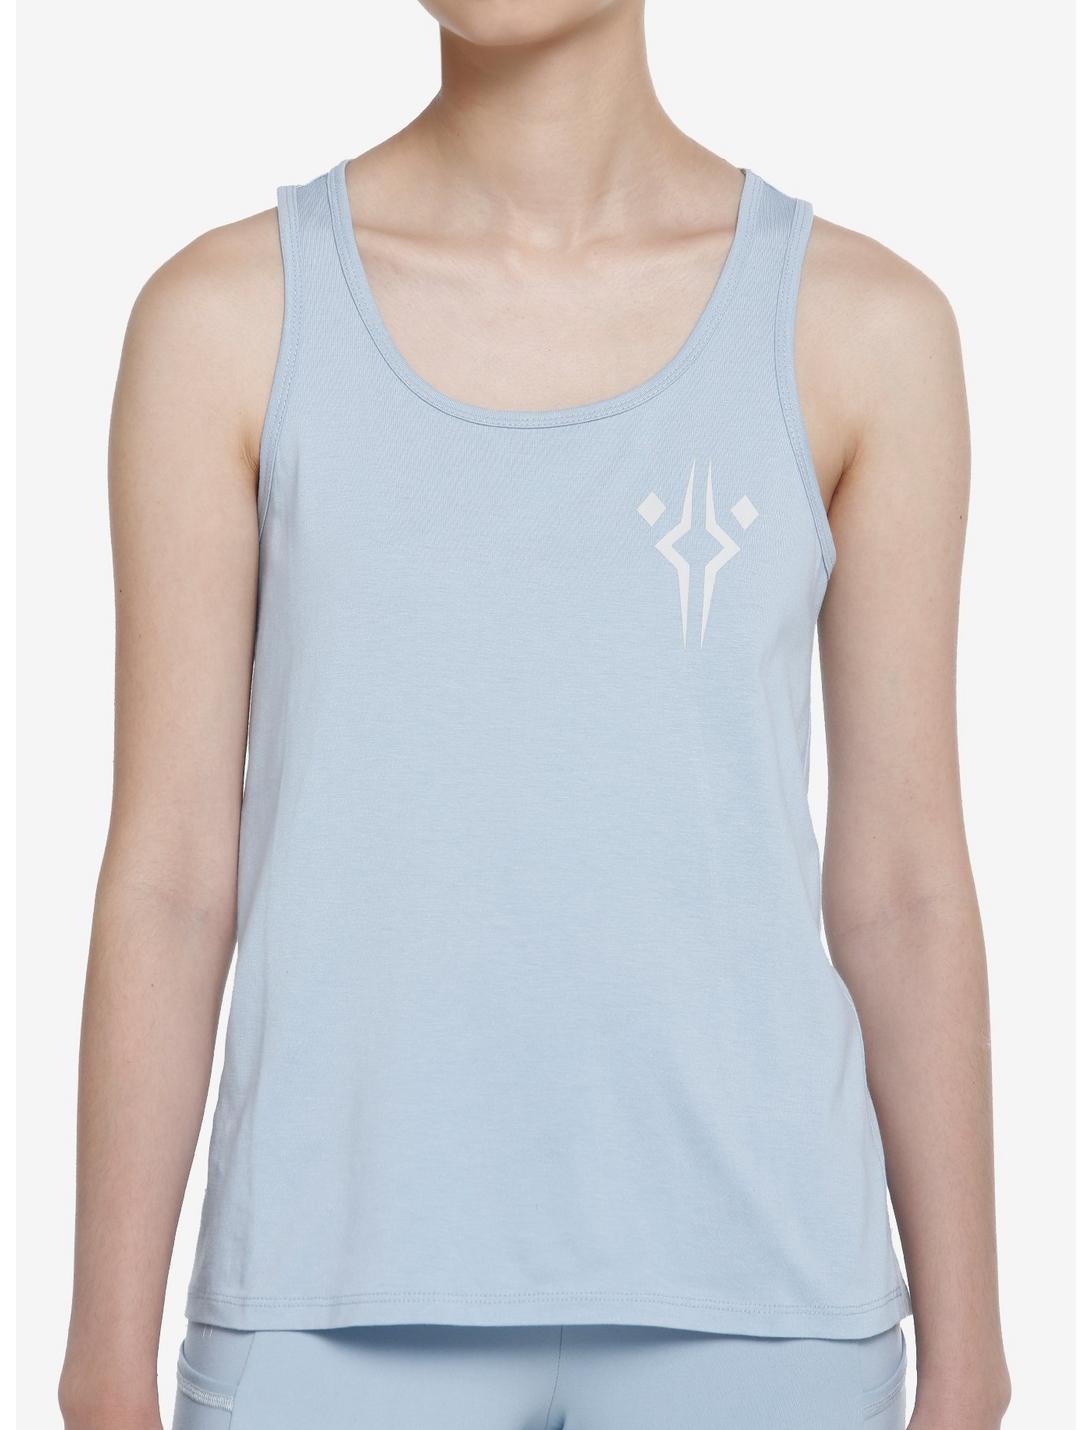 Her Universe Star Wars Ahsoka Tano Tank Top Her Universe Exclusive, ICE BLUE, hi-res